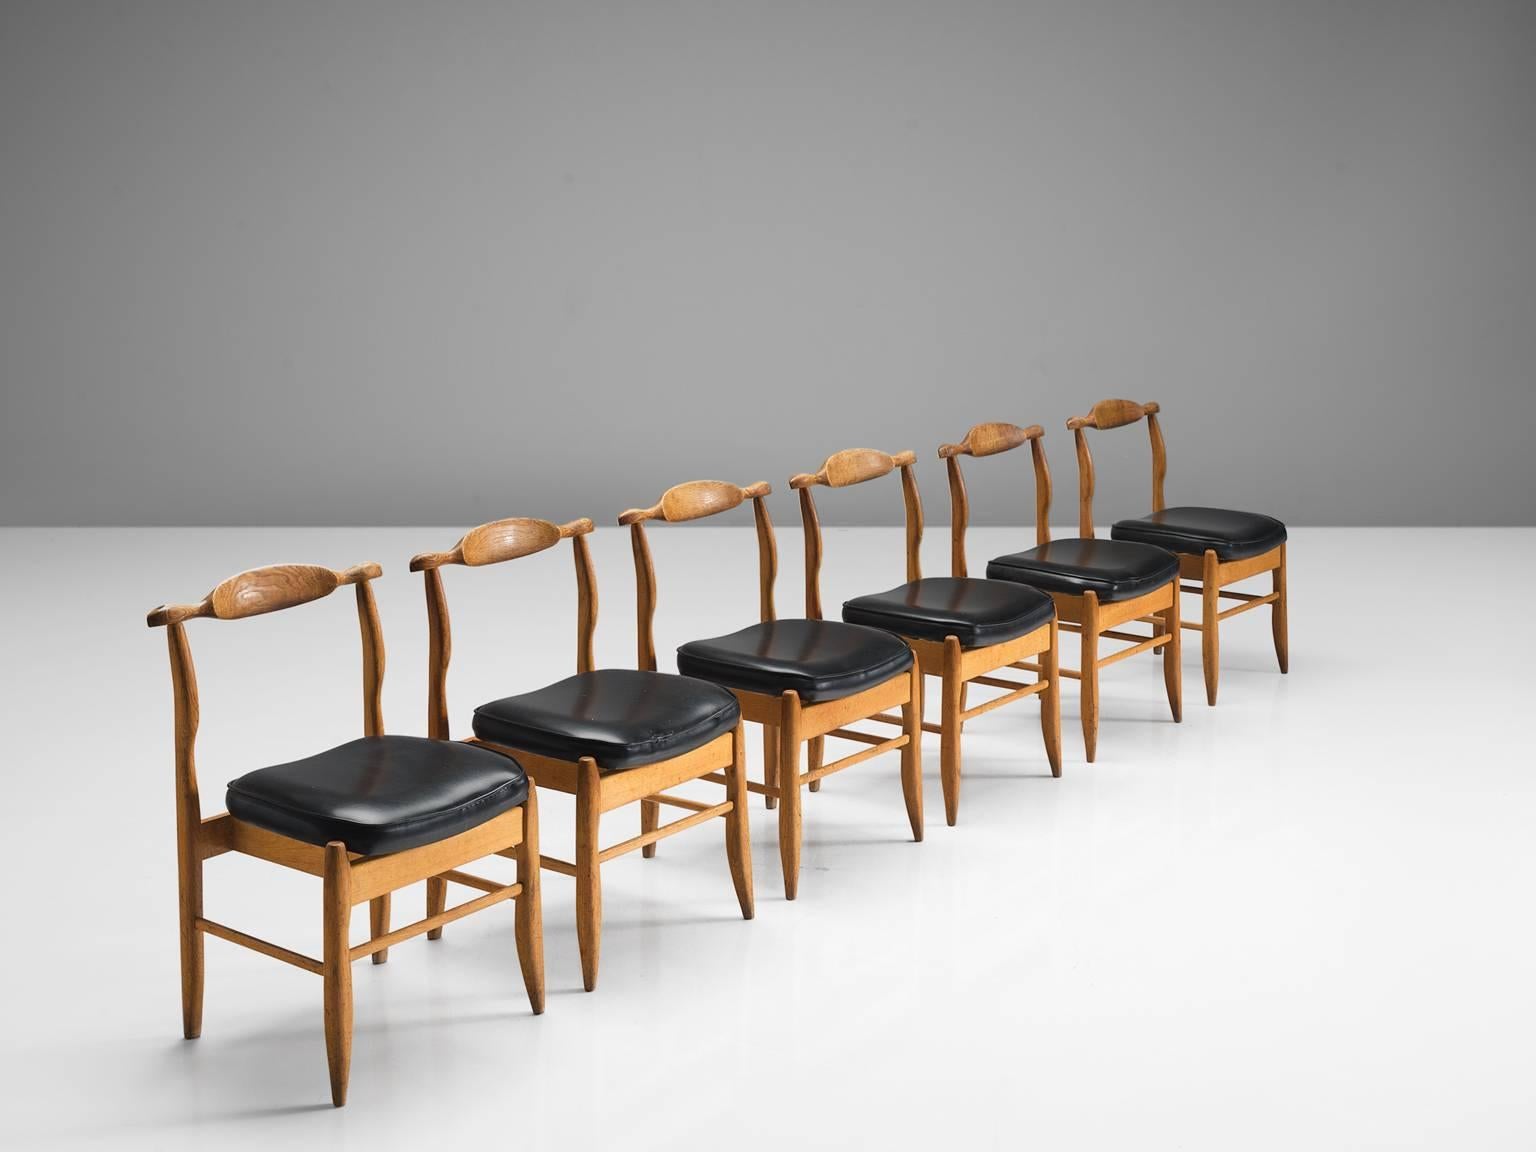 Guillerme & Chambron, set of six dining chairs, in oak and black faux leather, France, 1960s.

Set of six elegant dining chairs in solid oak by Guillerme and Chambron. These chairs show the characteristic frame of this French designer duo. Tapered